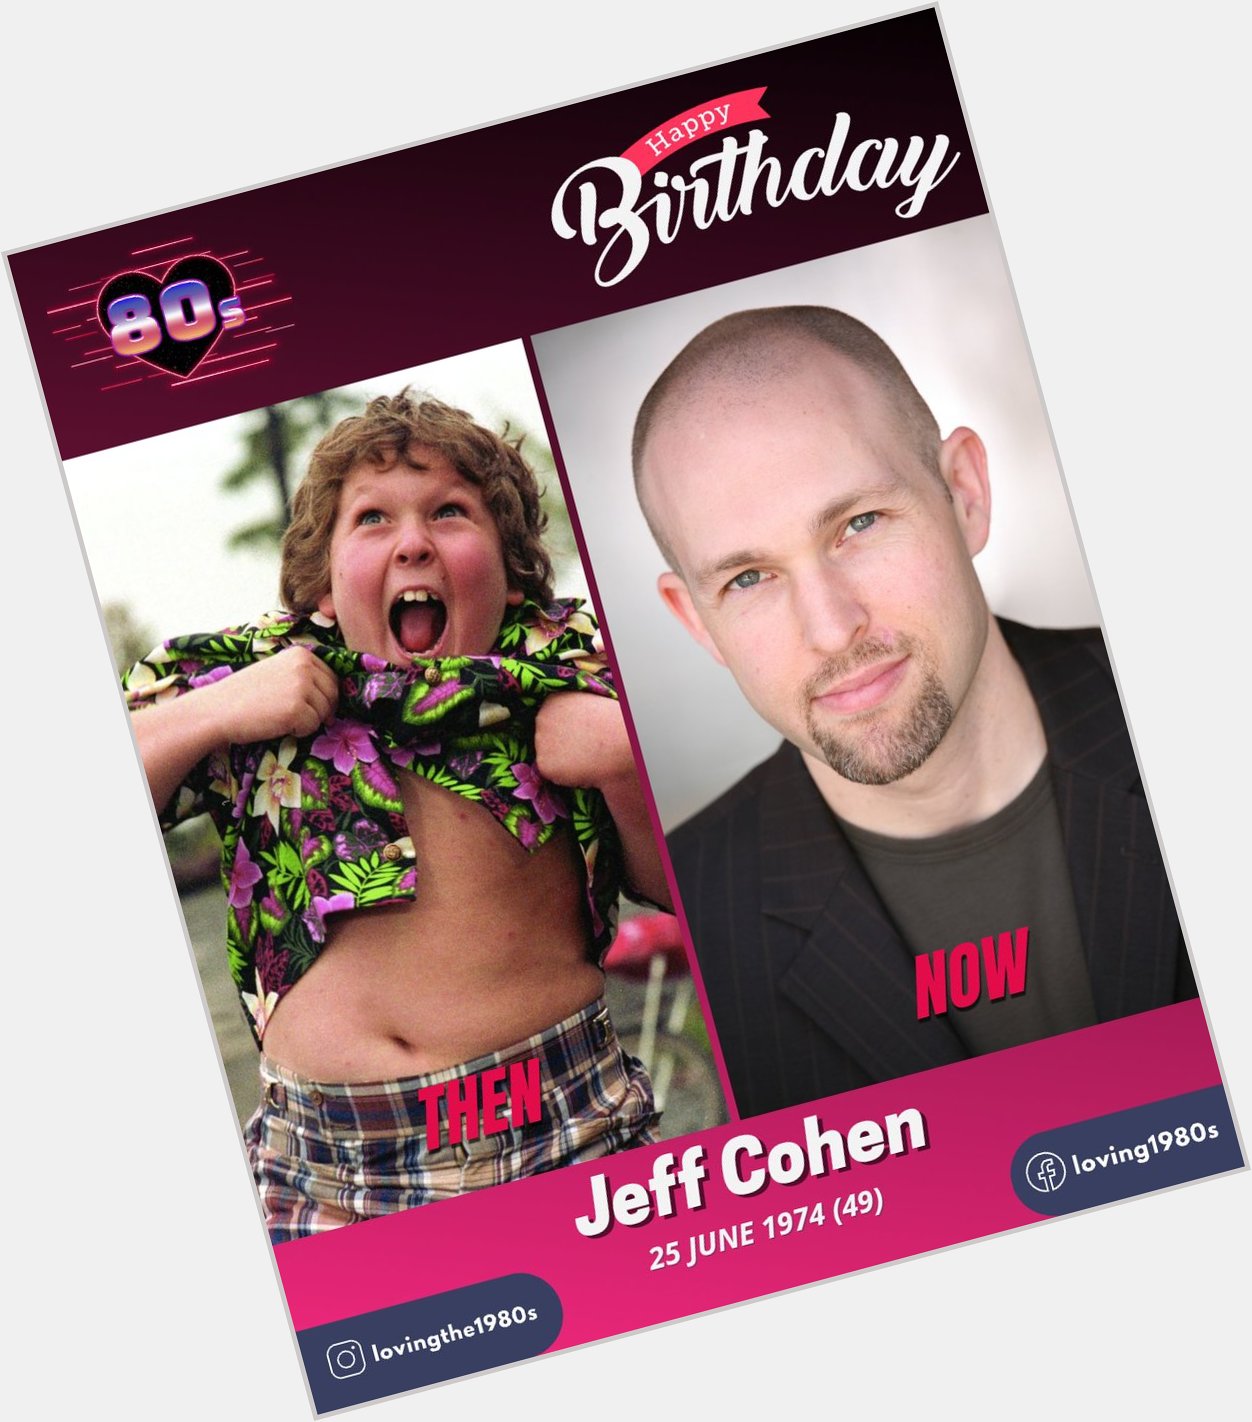 Happy birthday to Jeff Cohen, who turns 49 today!      